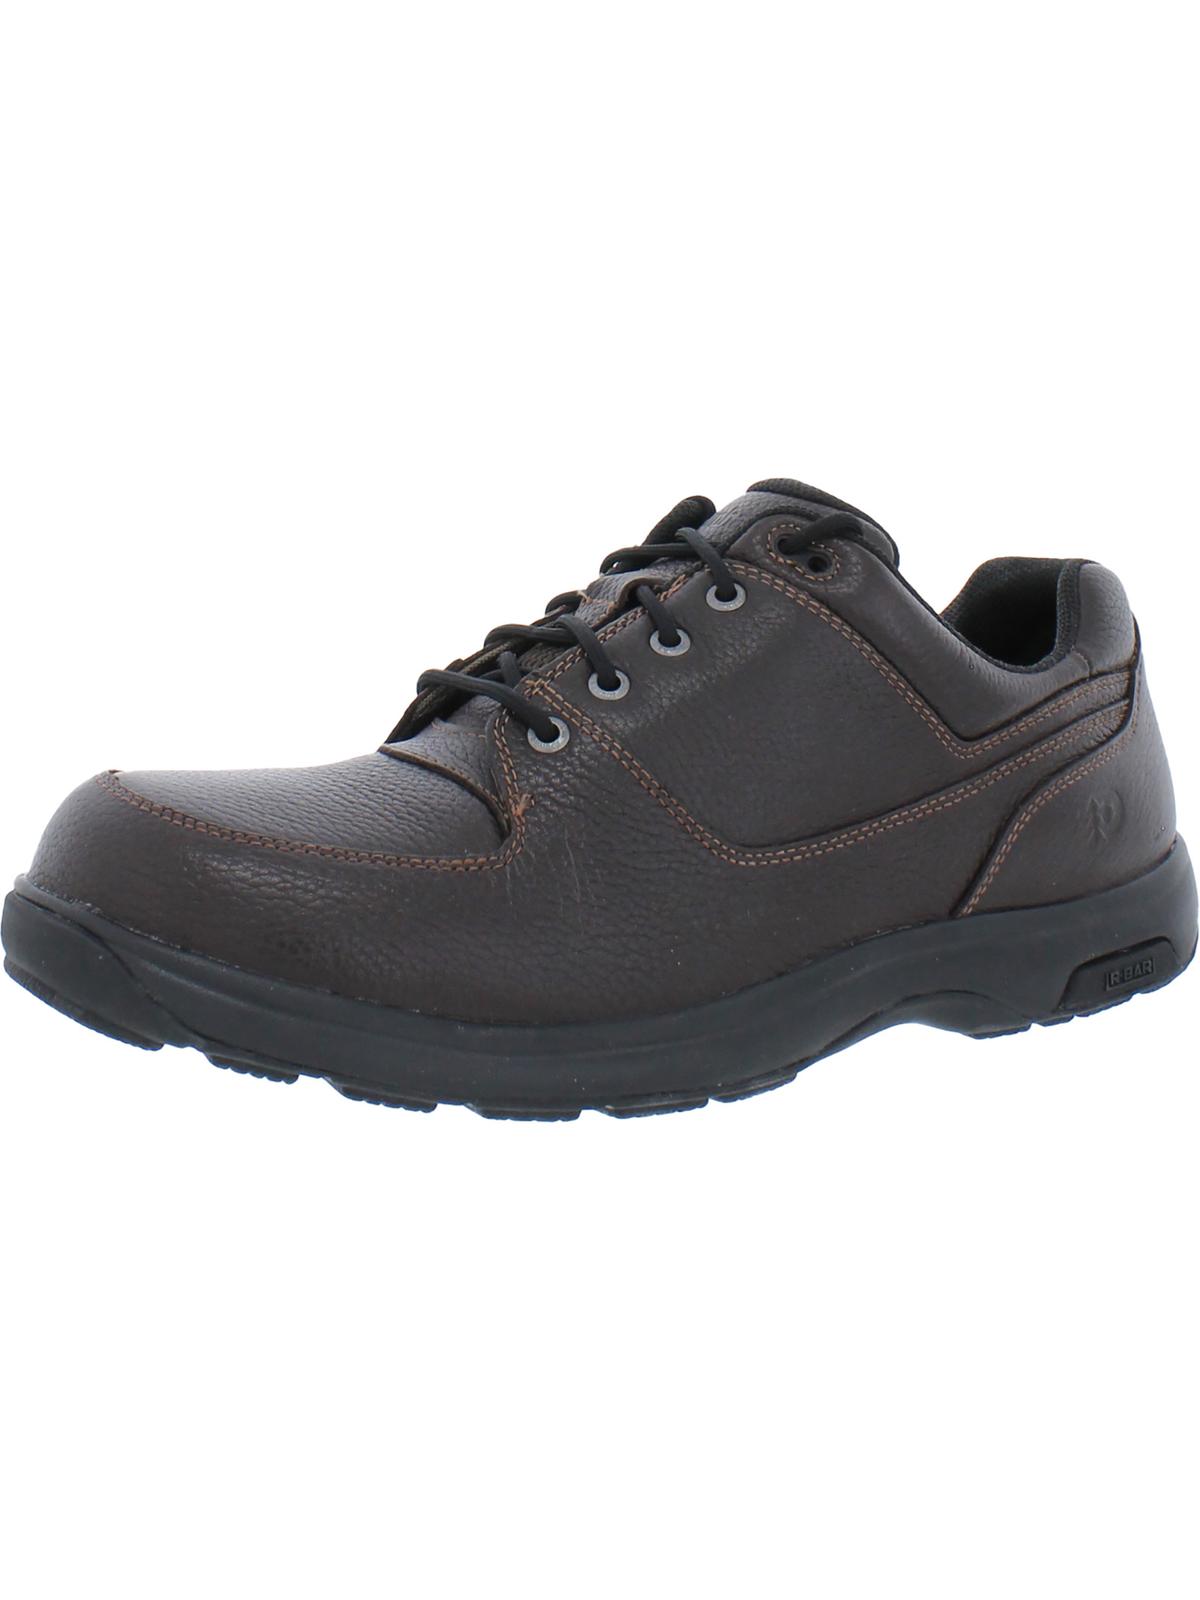 DUNHAM Windsor Mens Leather Lifestyle Casual and Fashion Sneakers